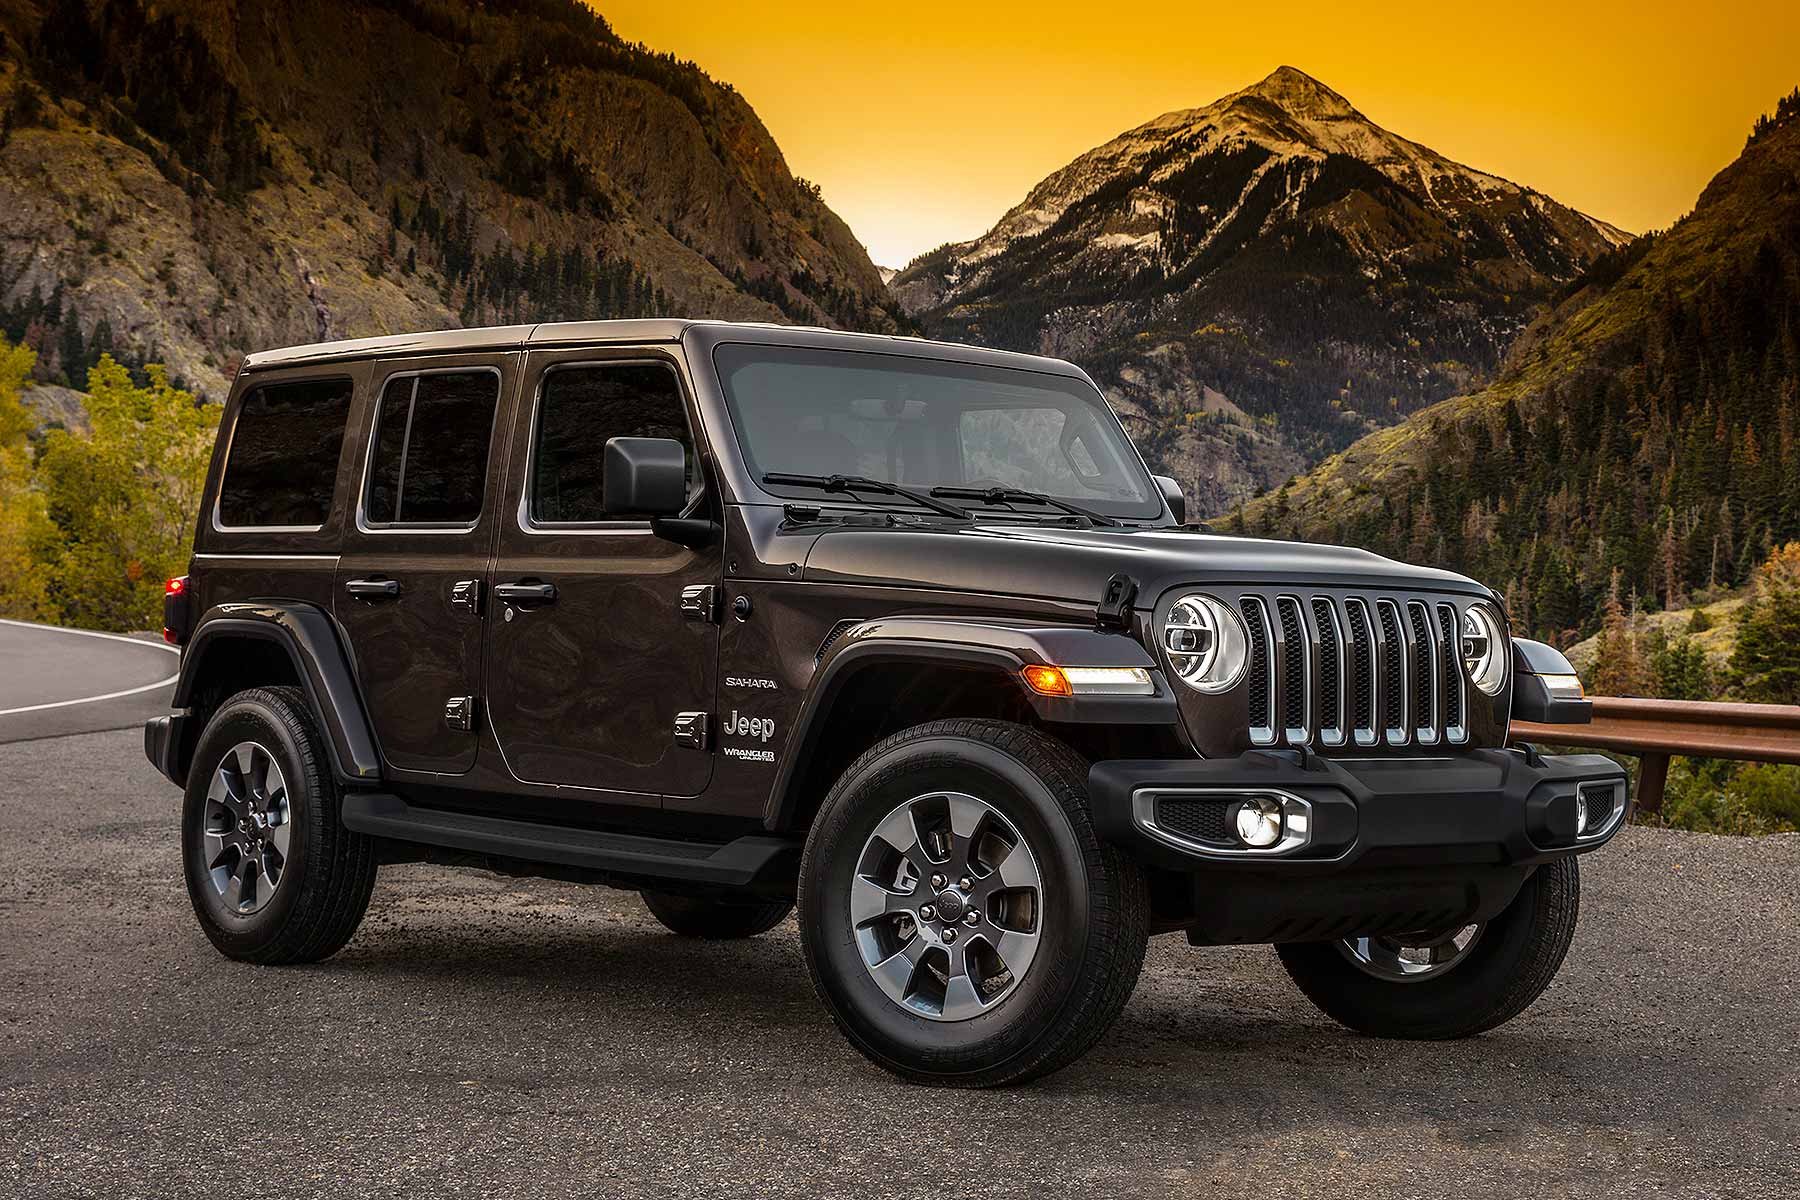 The new Jeep Wrangler is priced from £44,495 - Motoring Research